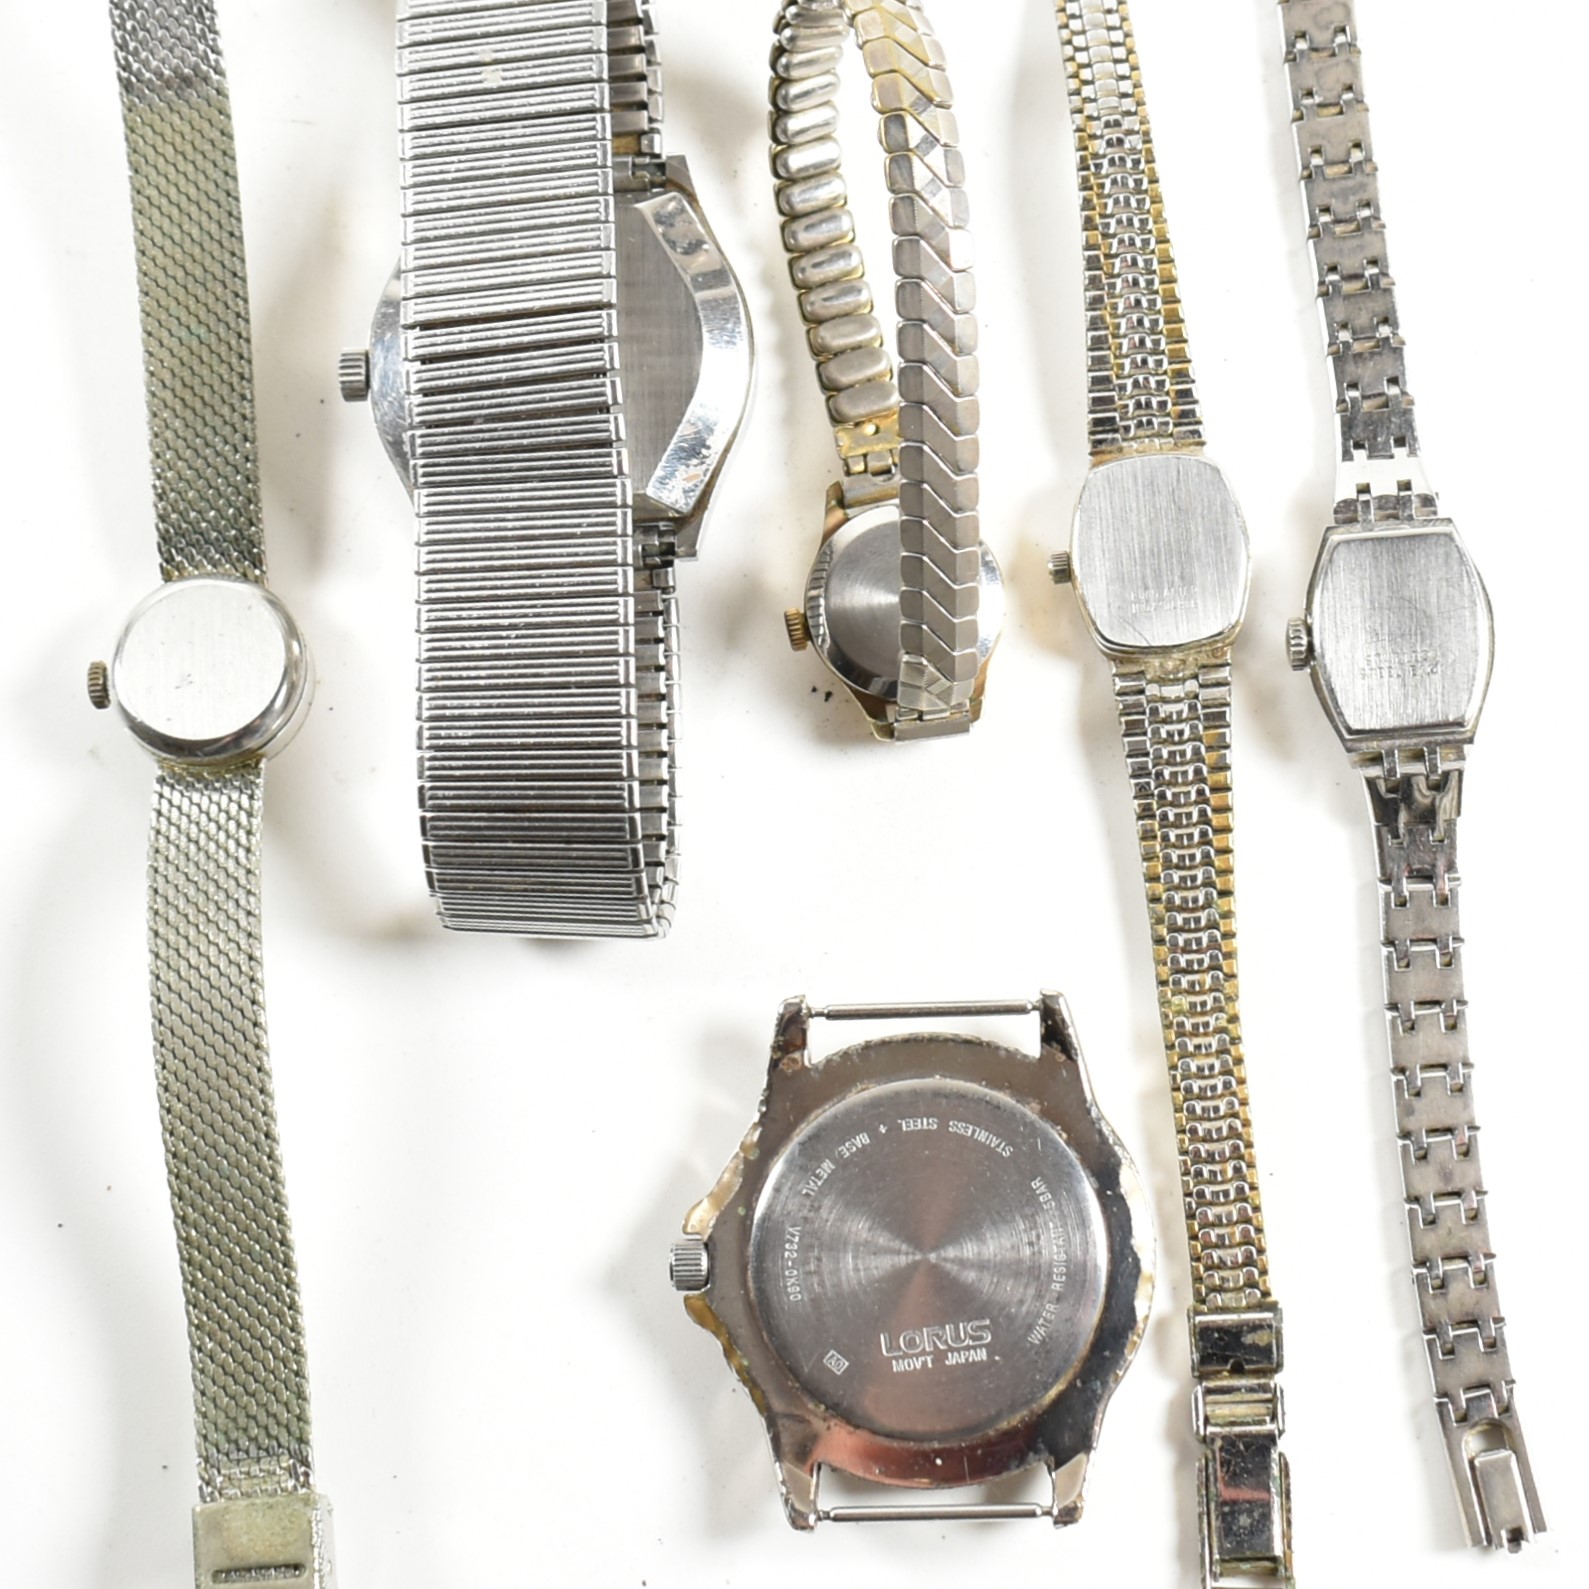 COLLECTION OF WRISTWATCHES INCLUDING TISSOT - Image 3 of 5